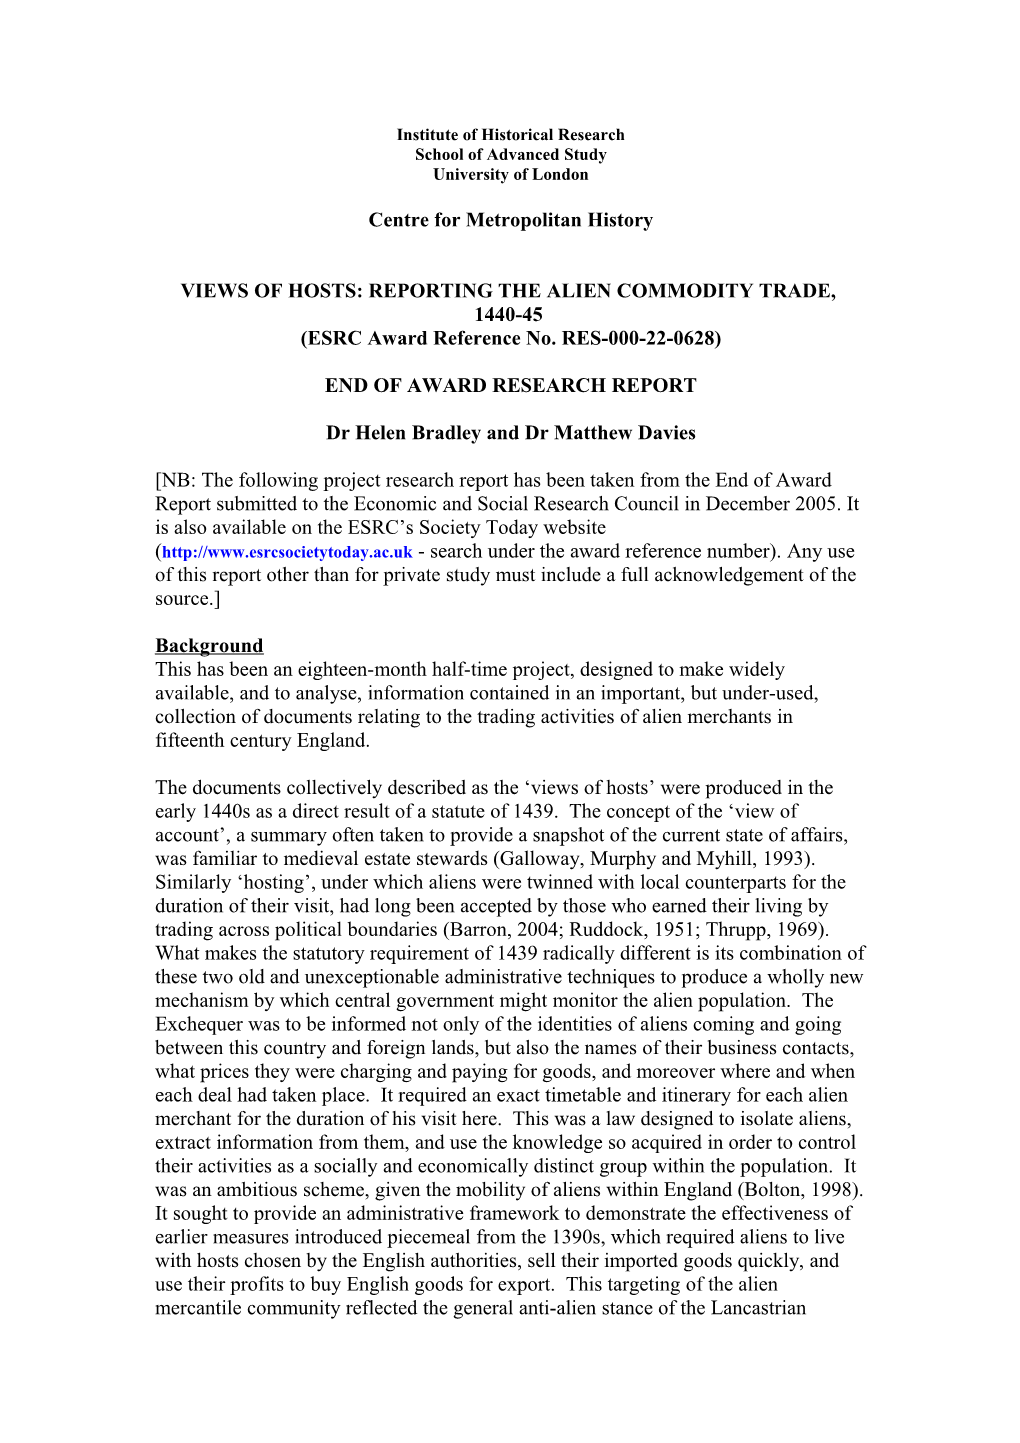 VIEWS of HOSTS: REPORTING the ALIEN COMMODITY TRADE, 1440-45 (ESRC Reference No